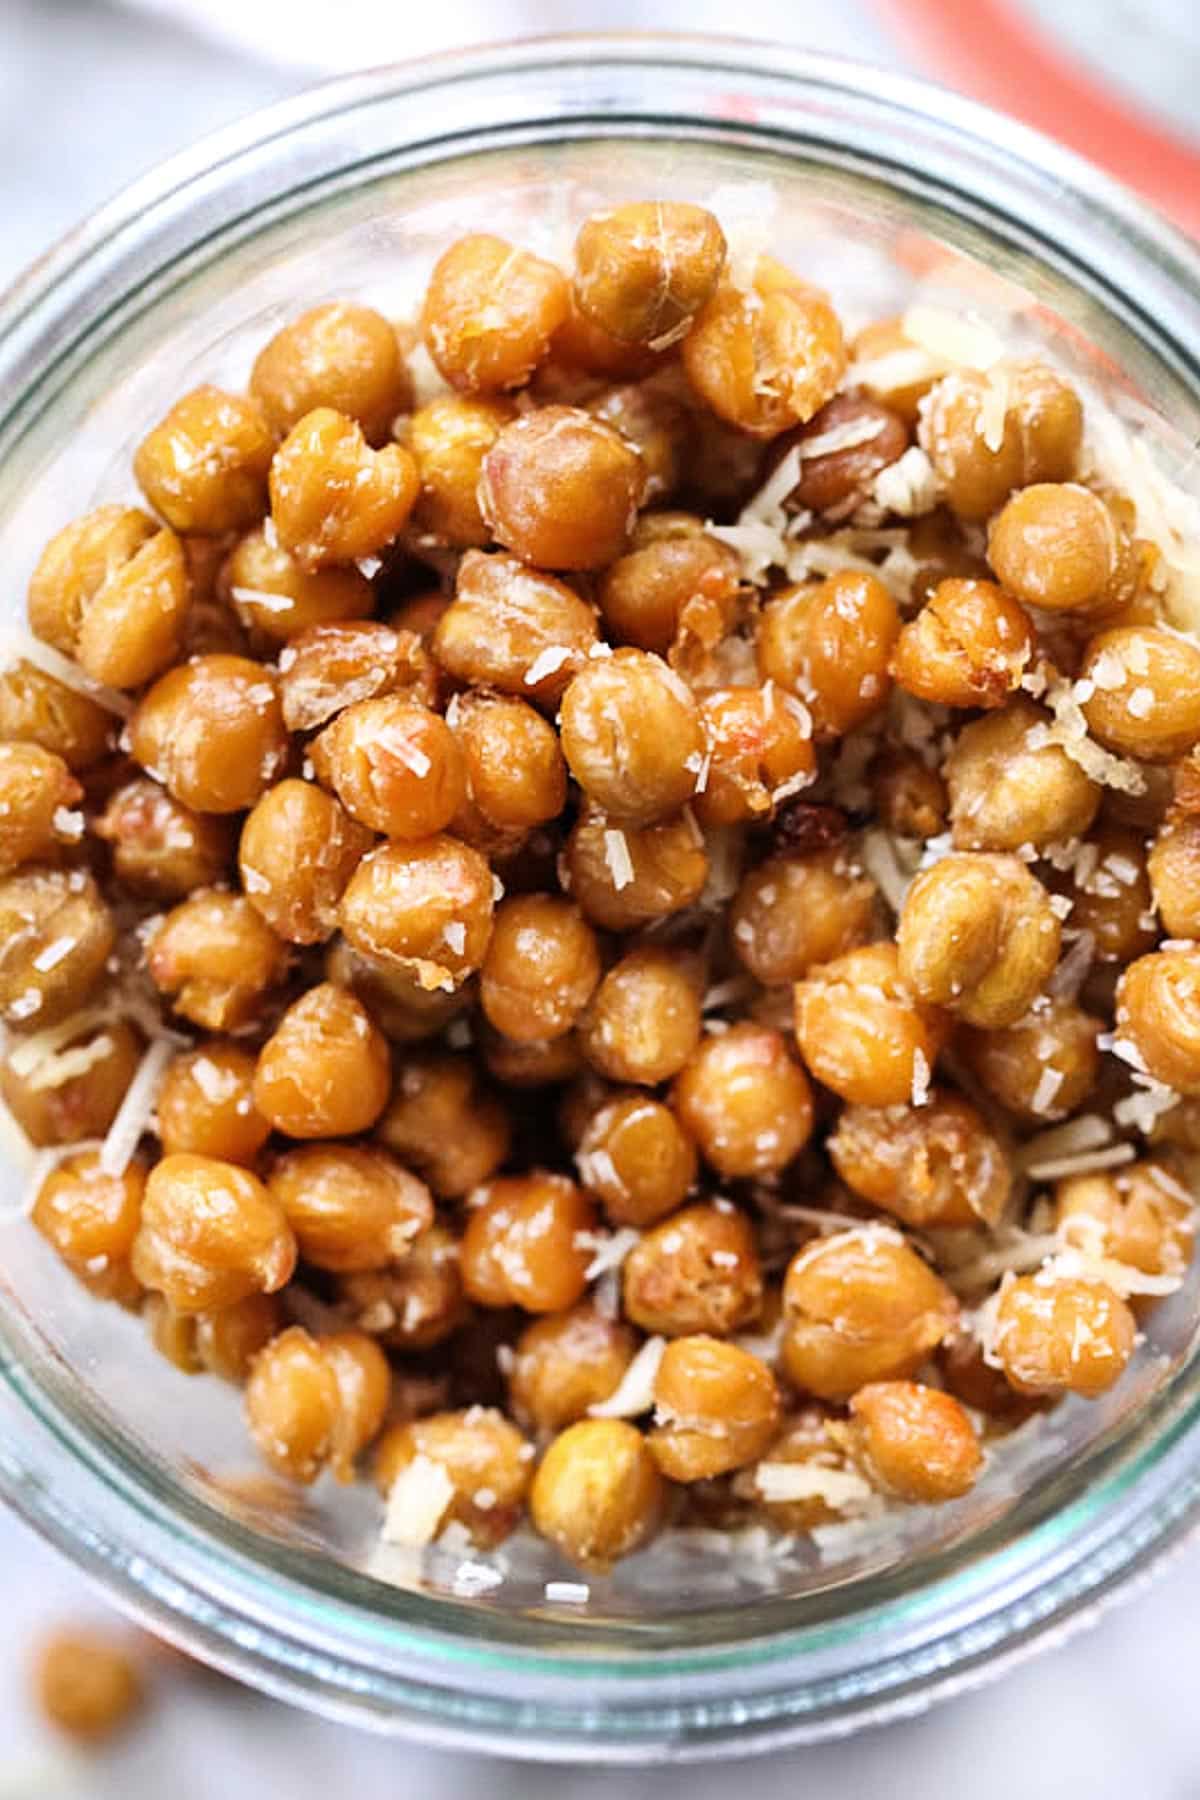 RedHot Roasted Chickpeas Recipe